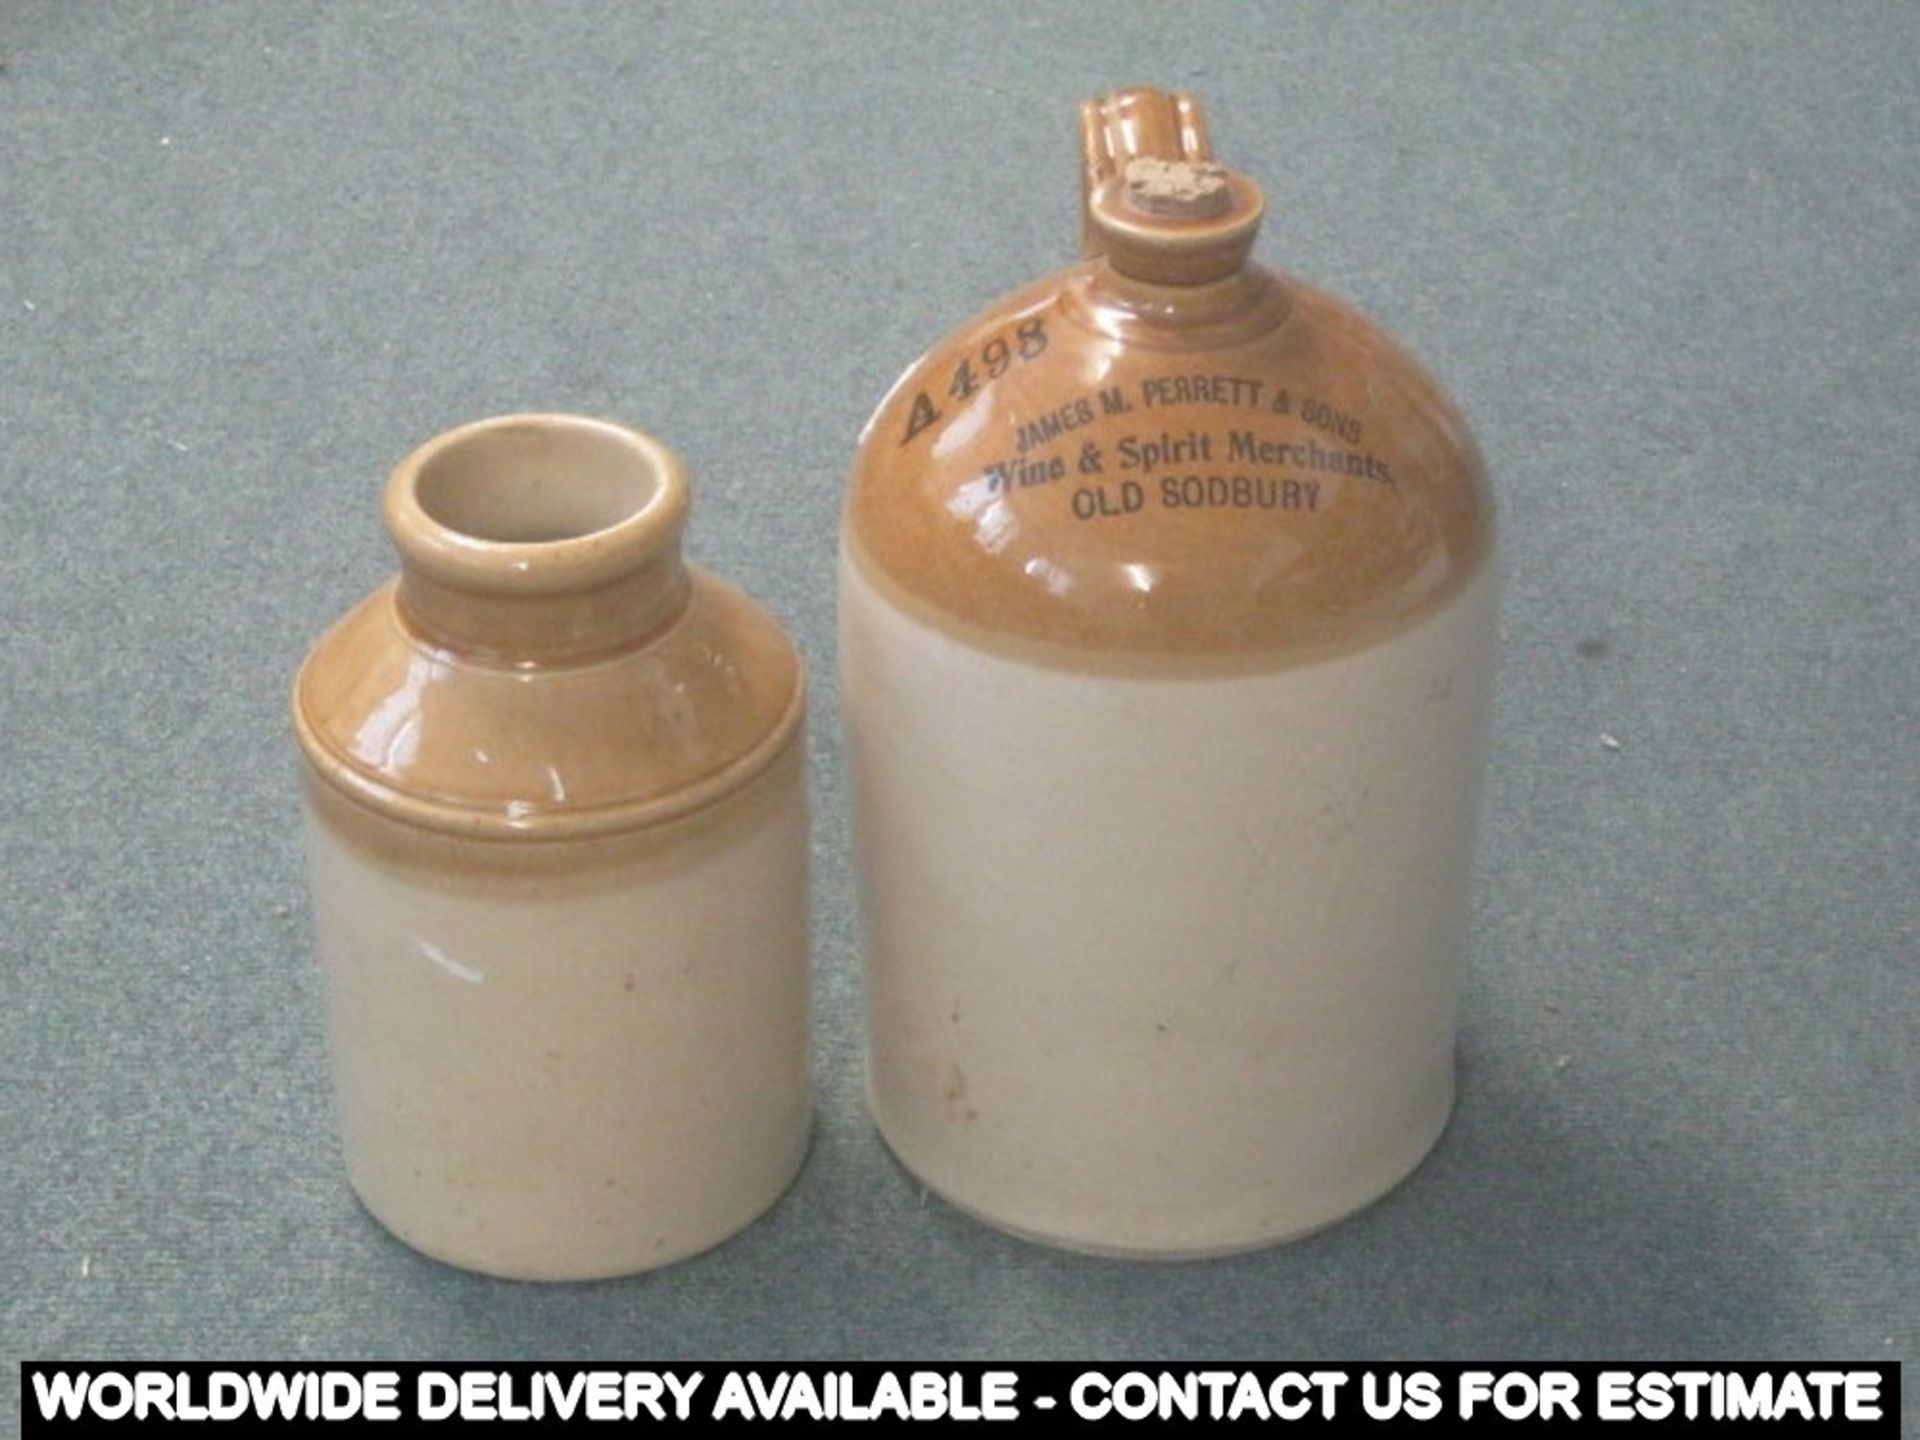 Stoneware flagon and jar - one marked James M Perret & Sons of Old Sodbury A498